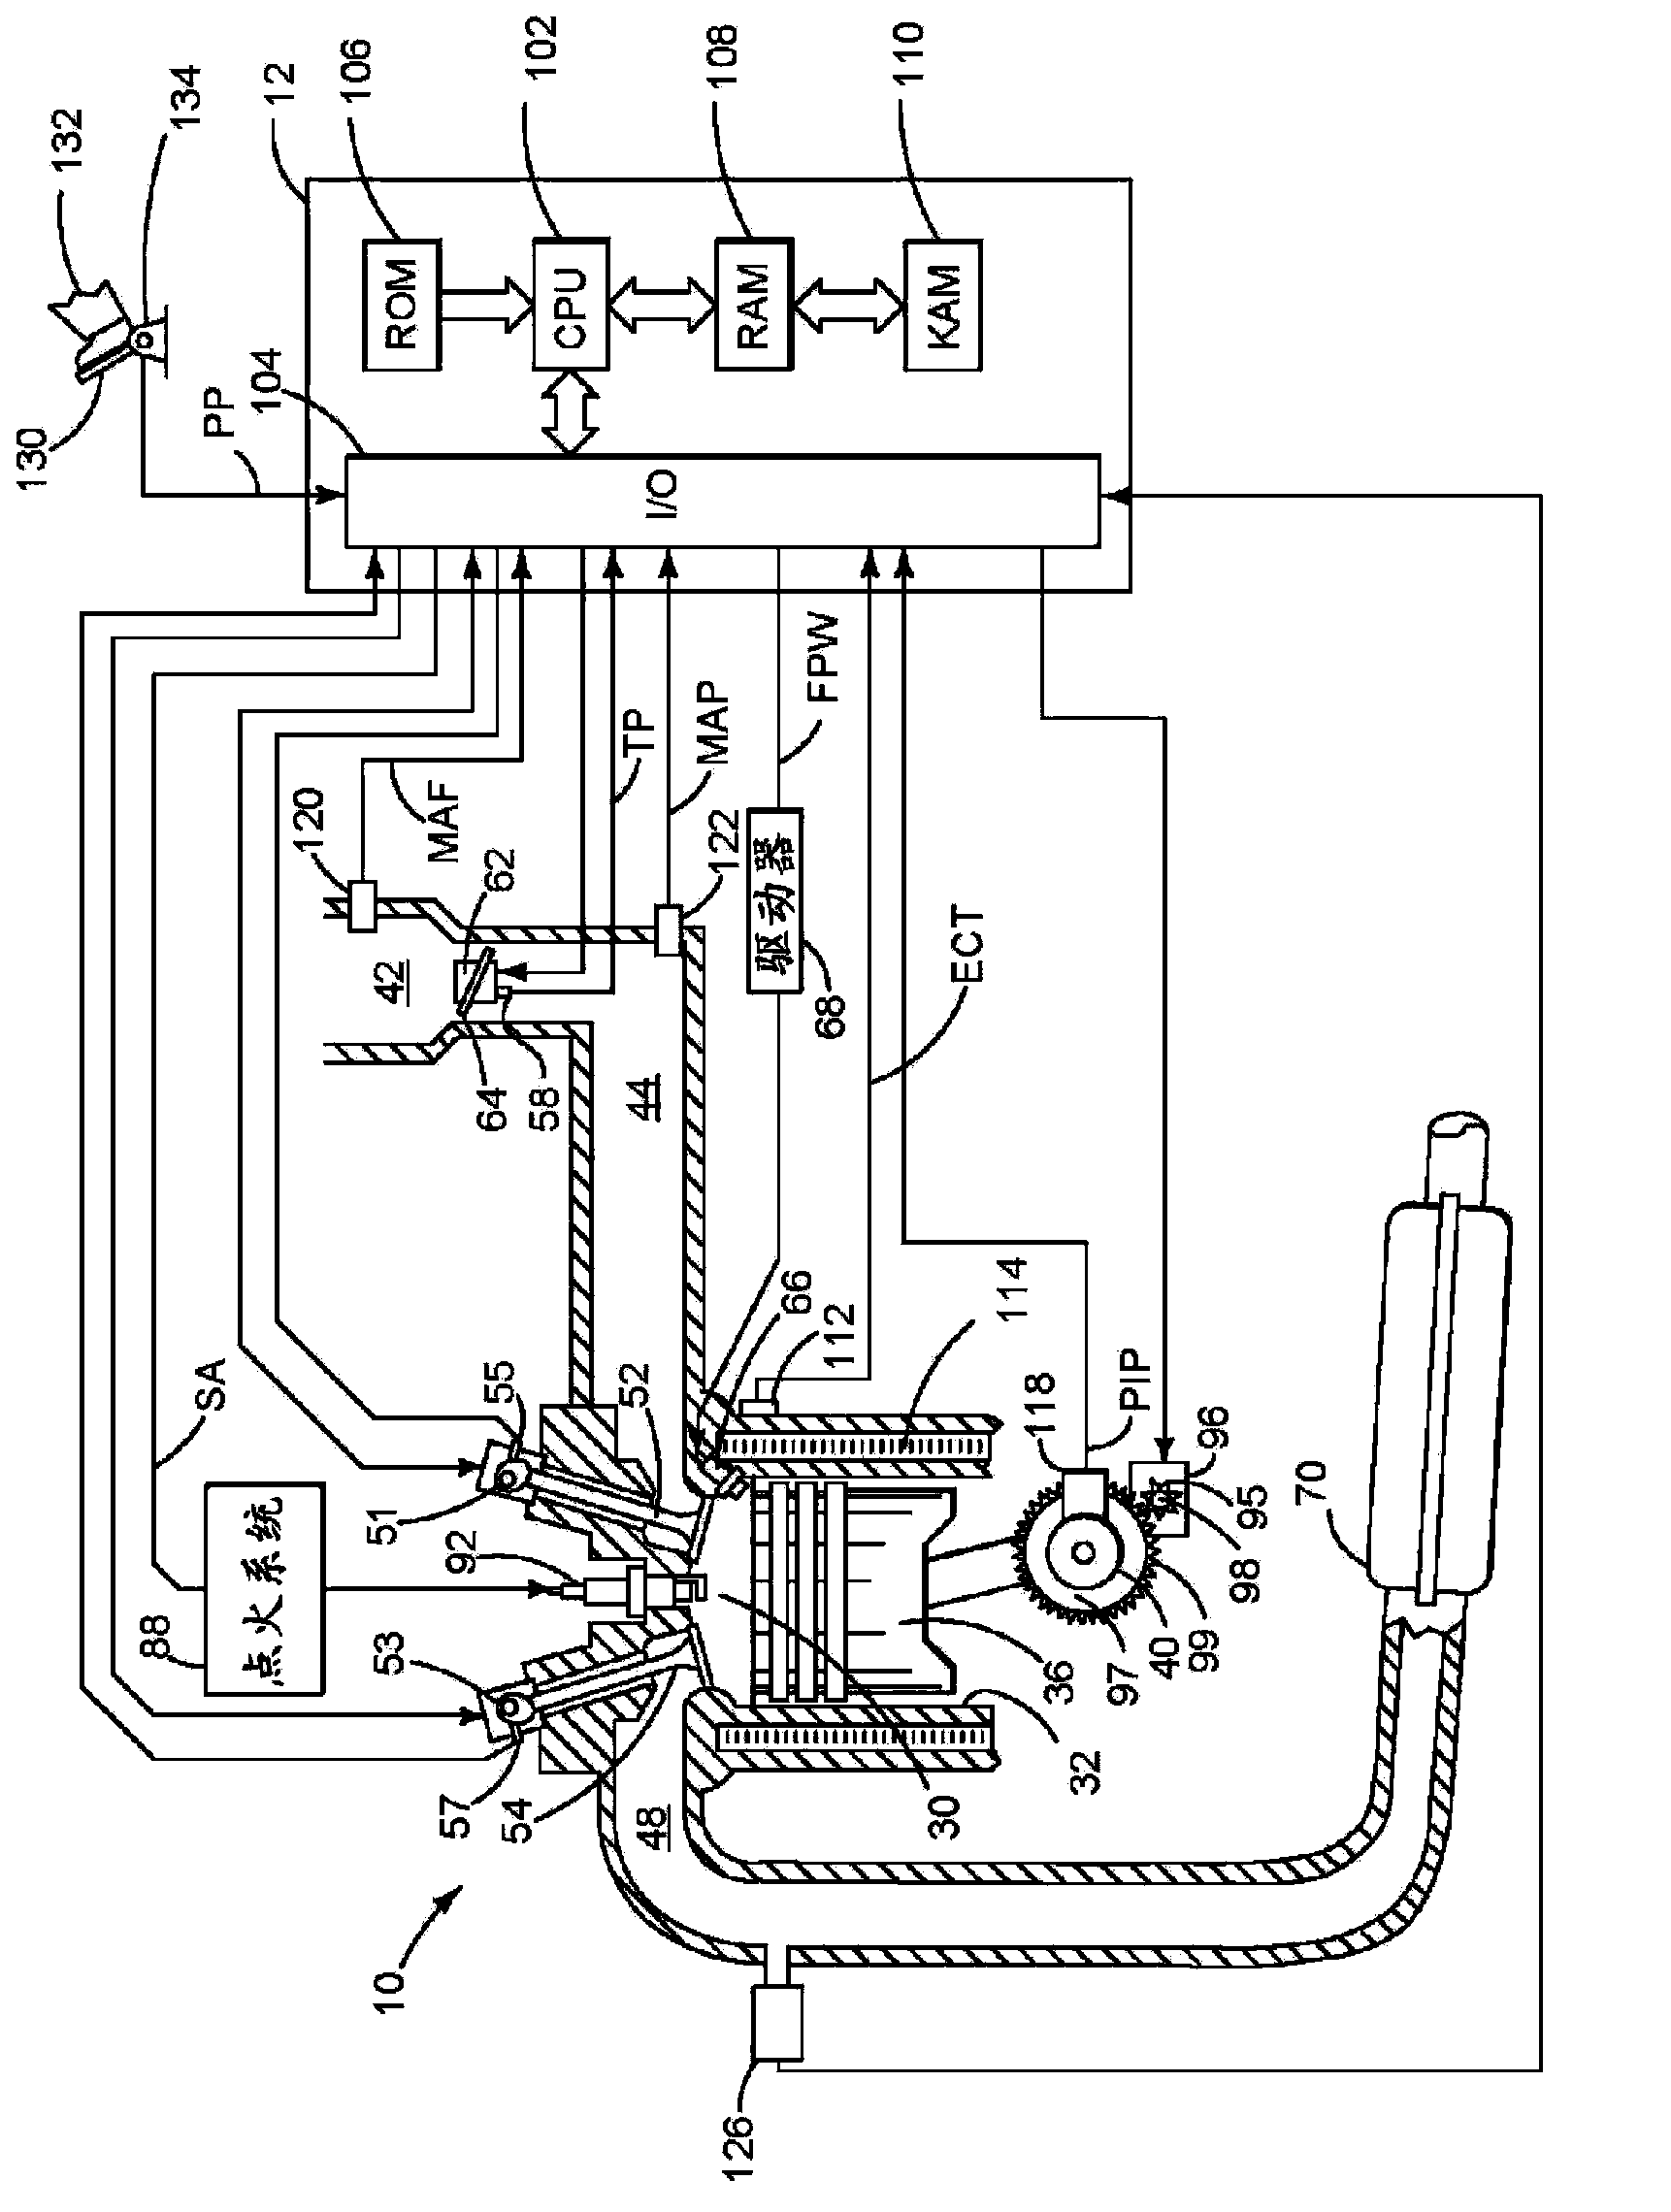 Method and system for hybrid vehicle